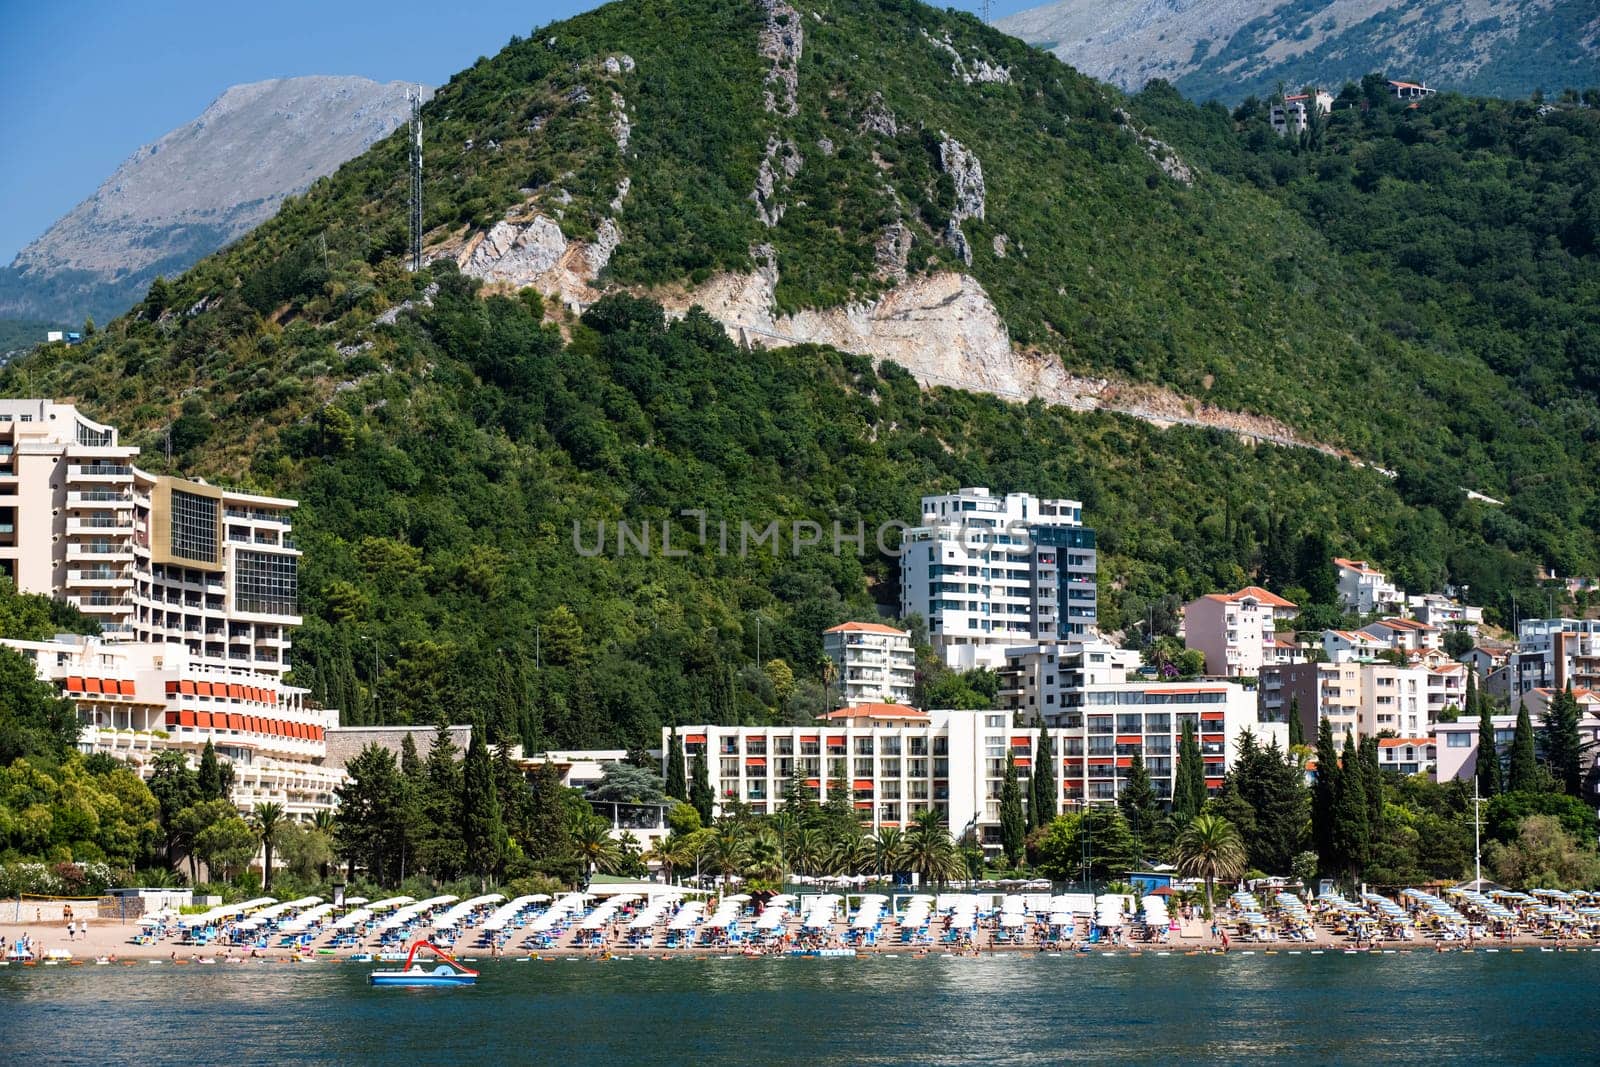 Modern Mediterranean city in Montenegro with resort beach, view from Adriatic sea. Luxury touristic coastline with mountains on background